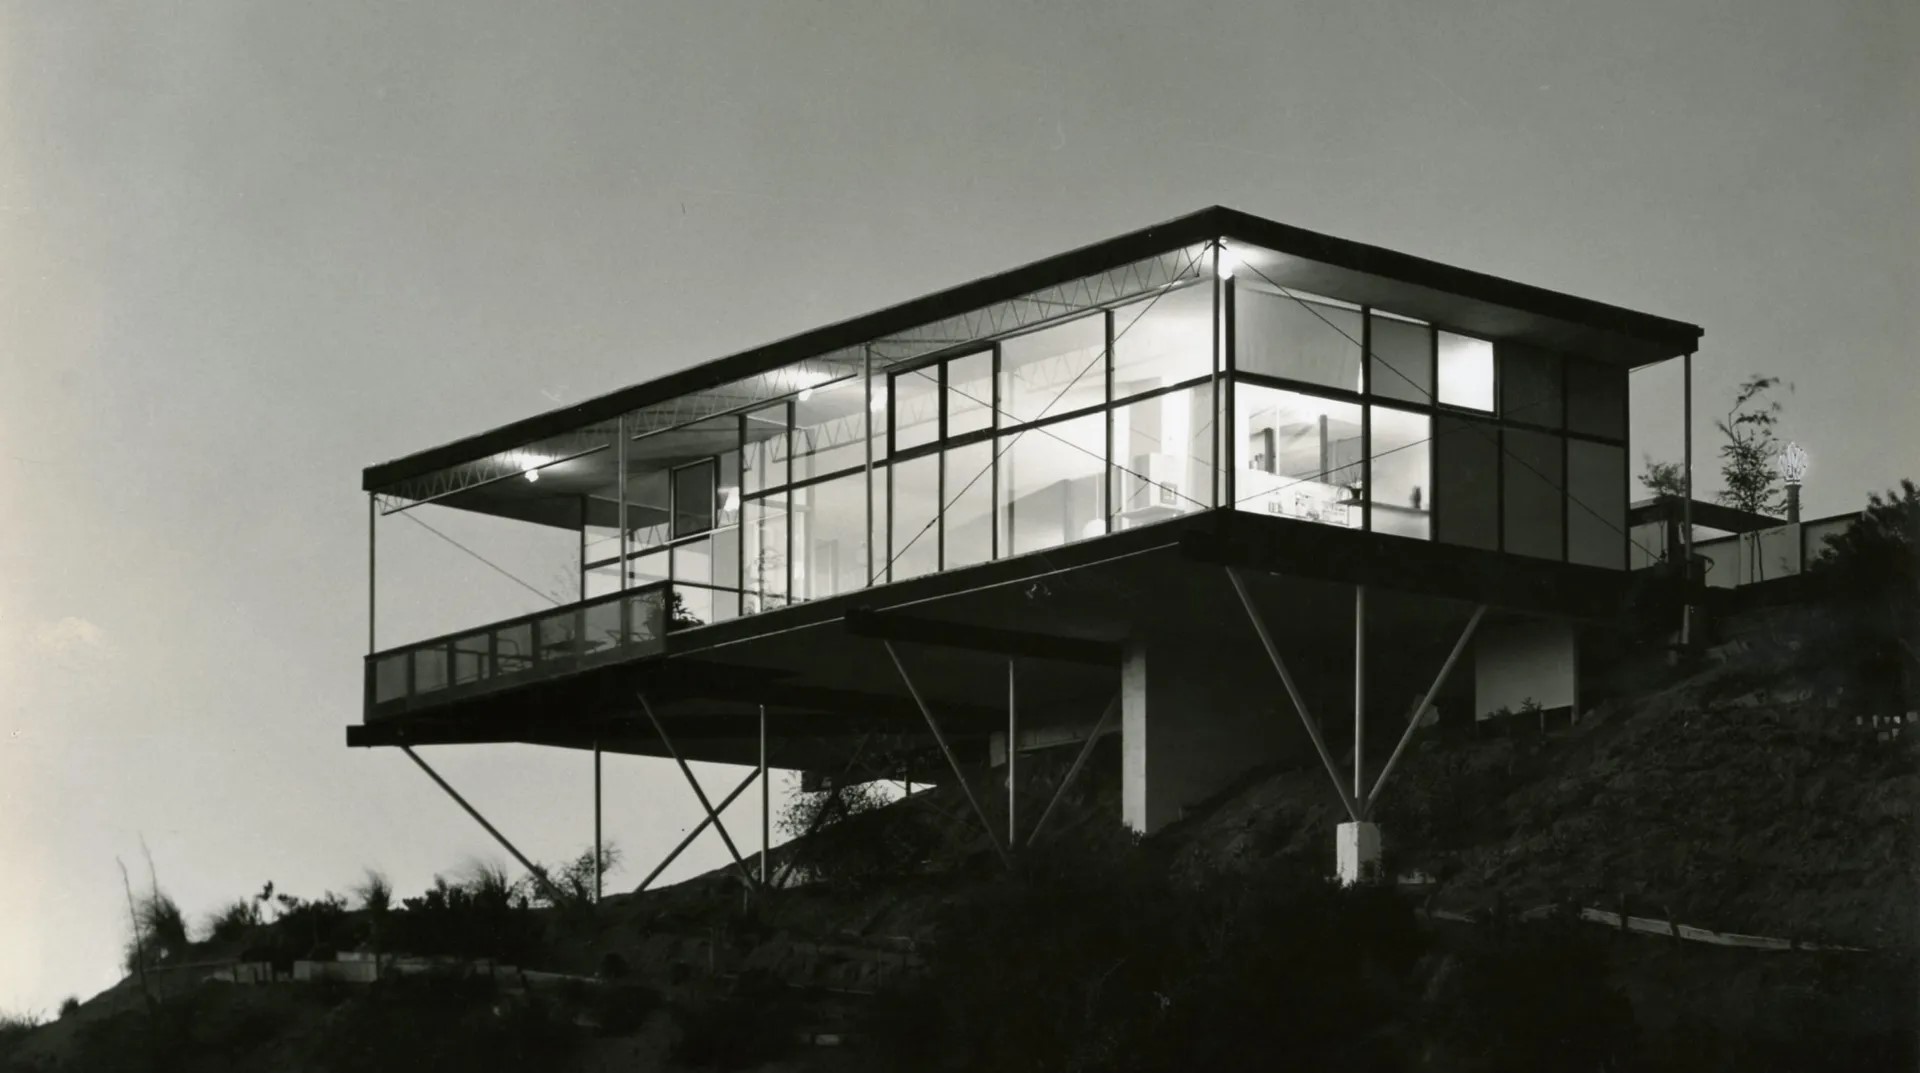 Exterior, 9376 Claircrest Drive, Beverly Hills, California, 1956-57. Designed by Greta M. Grossman. Photograph by John Hartley.